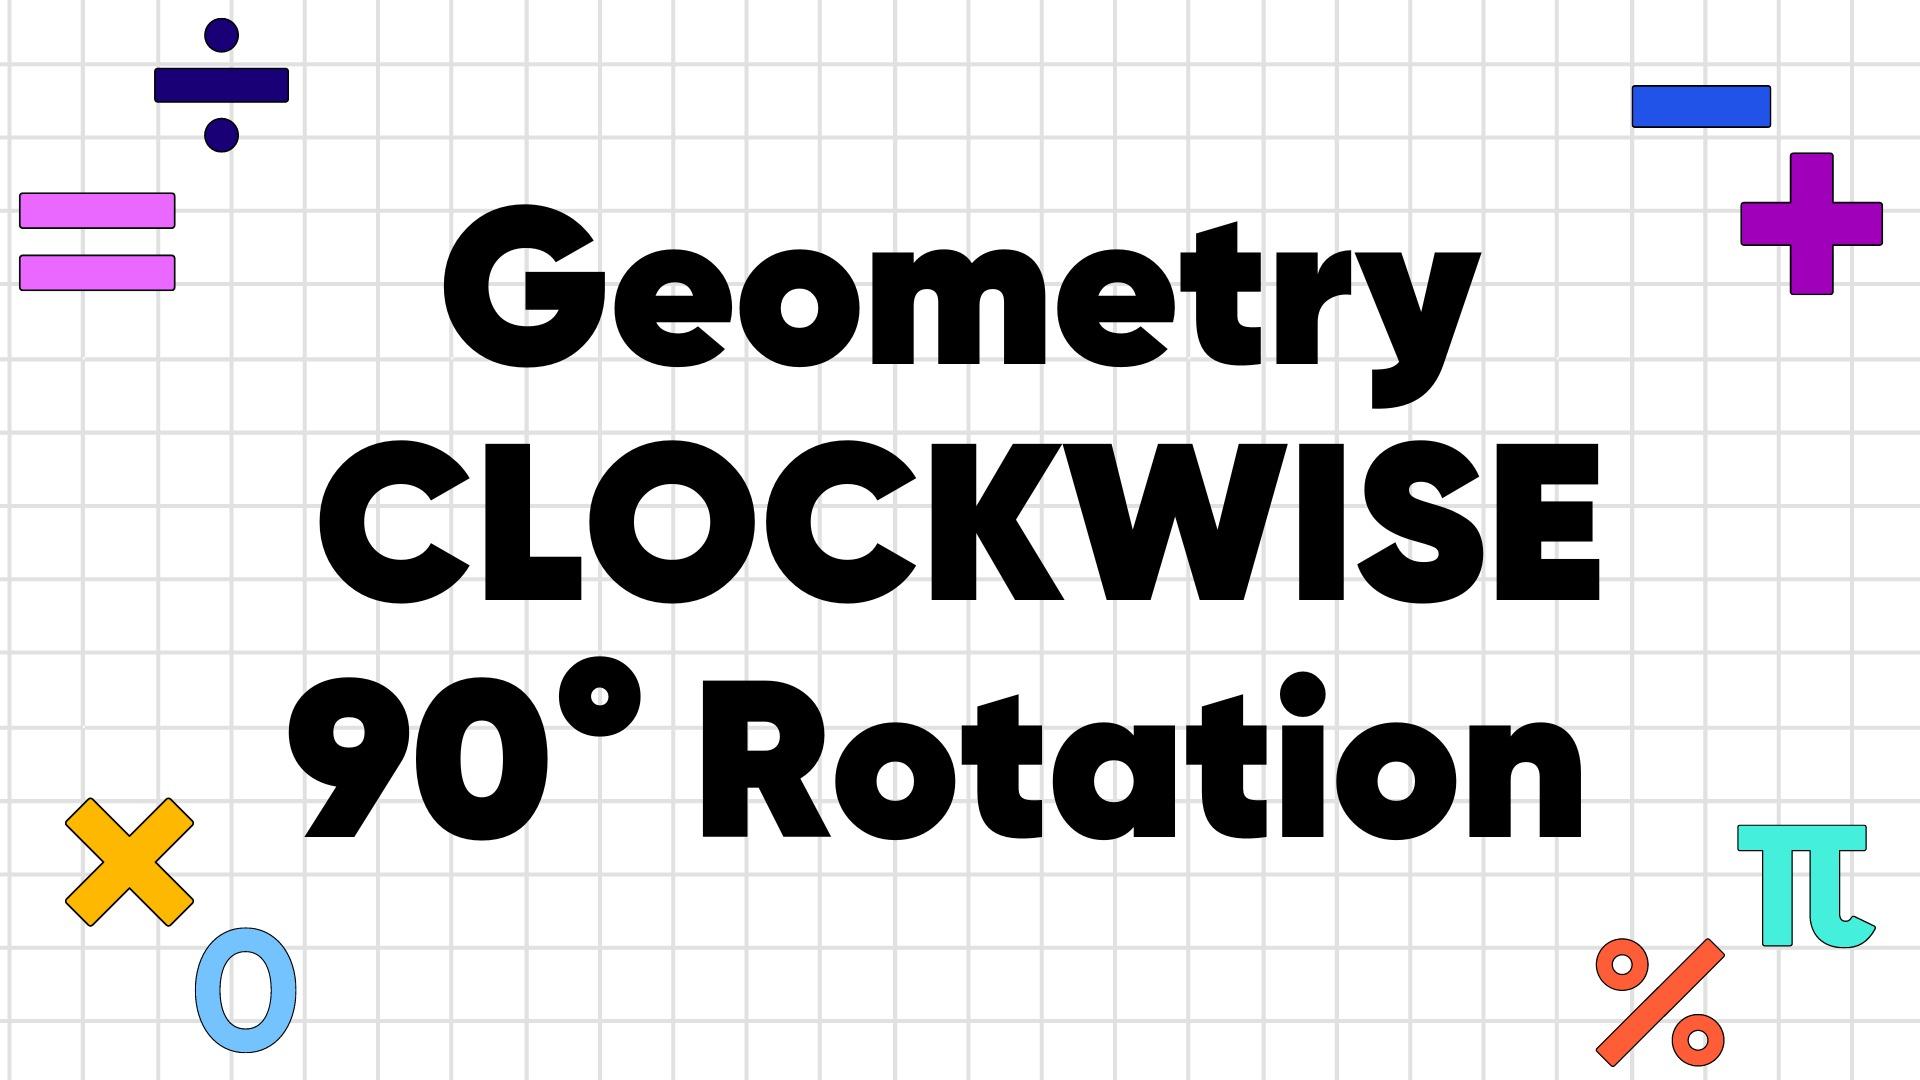 How to do a Clockwise Rotation of a Figure 90 Degrees